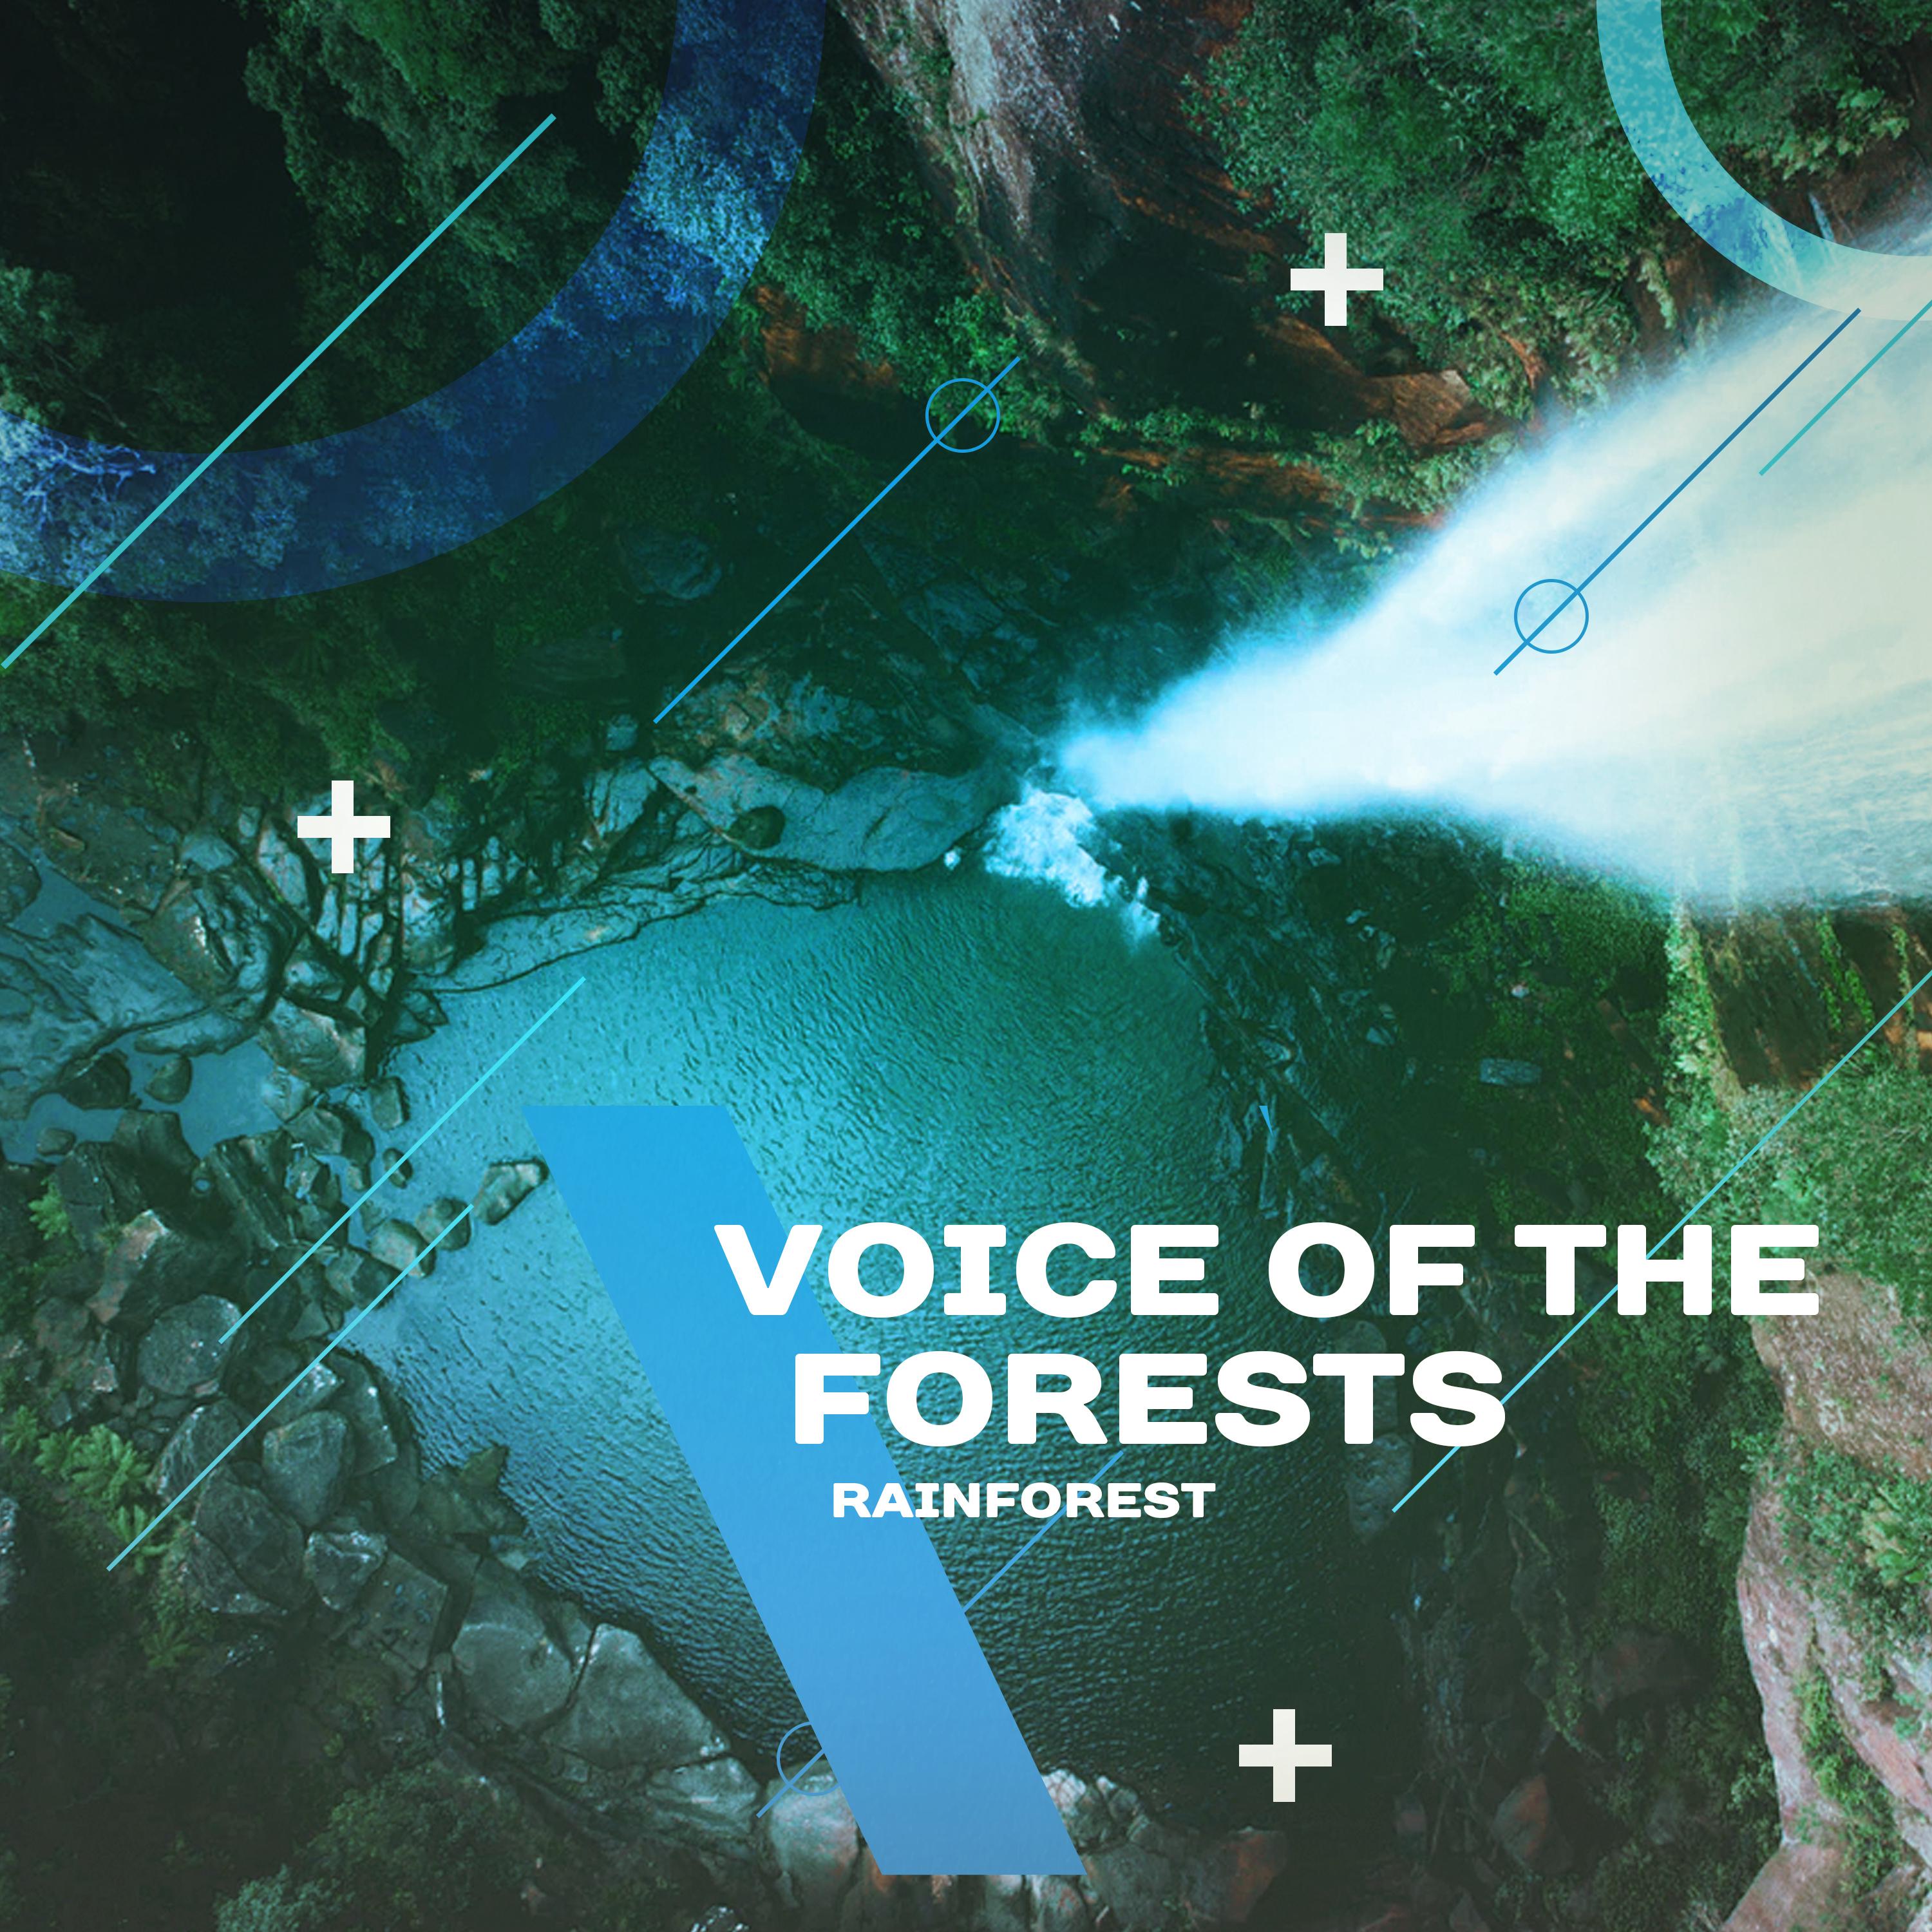 Voice of the Forests